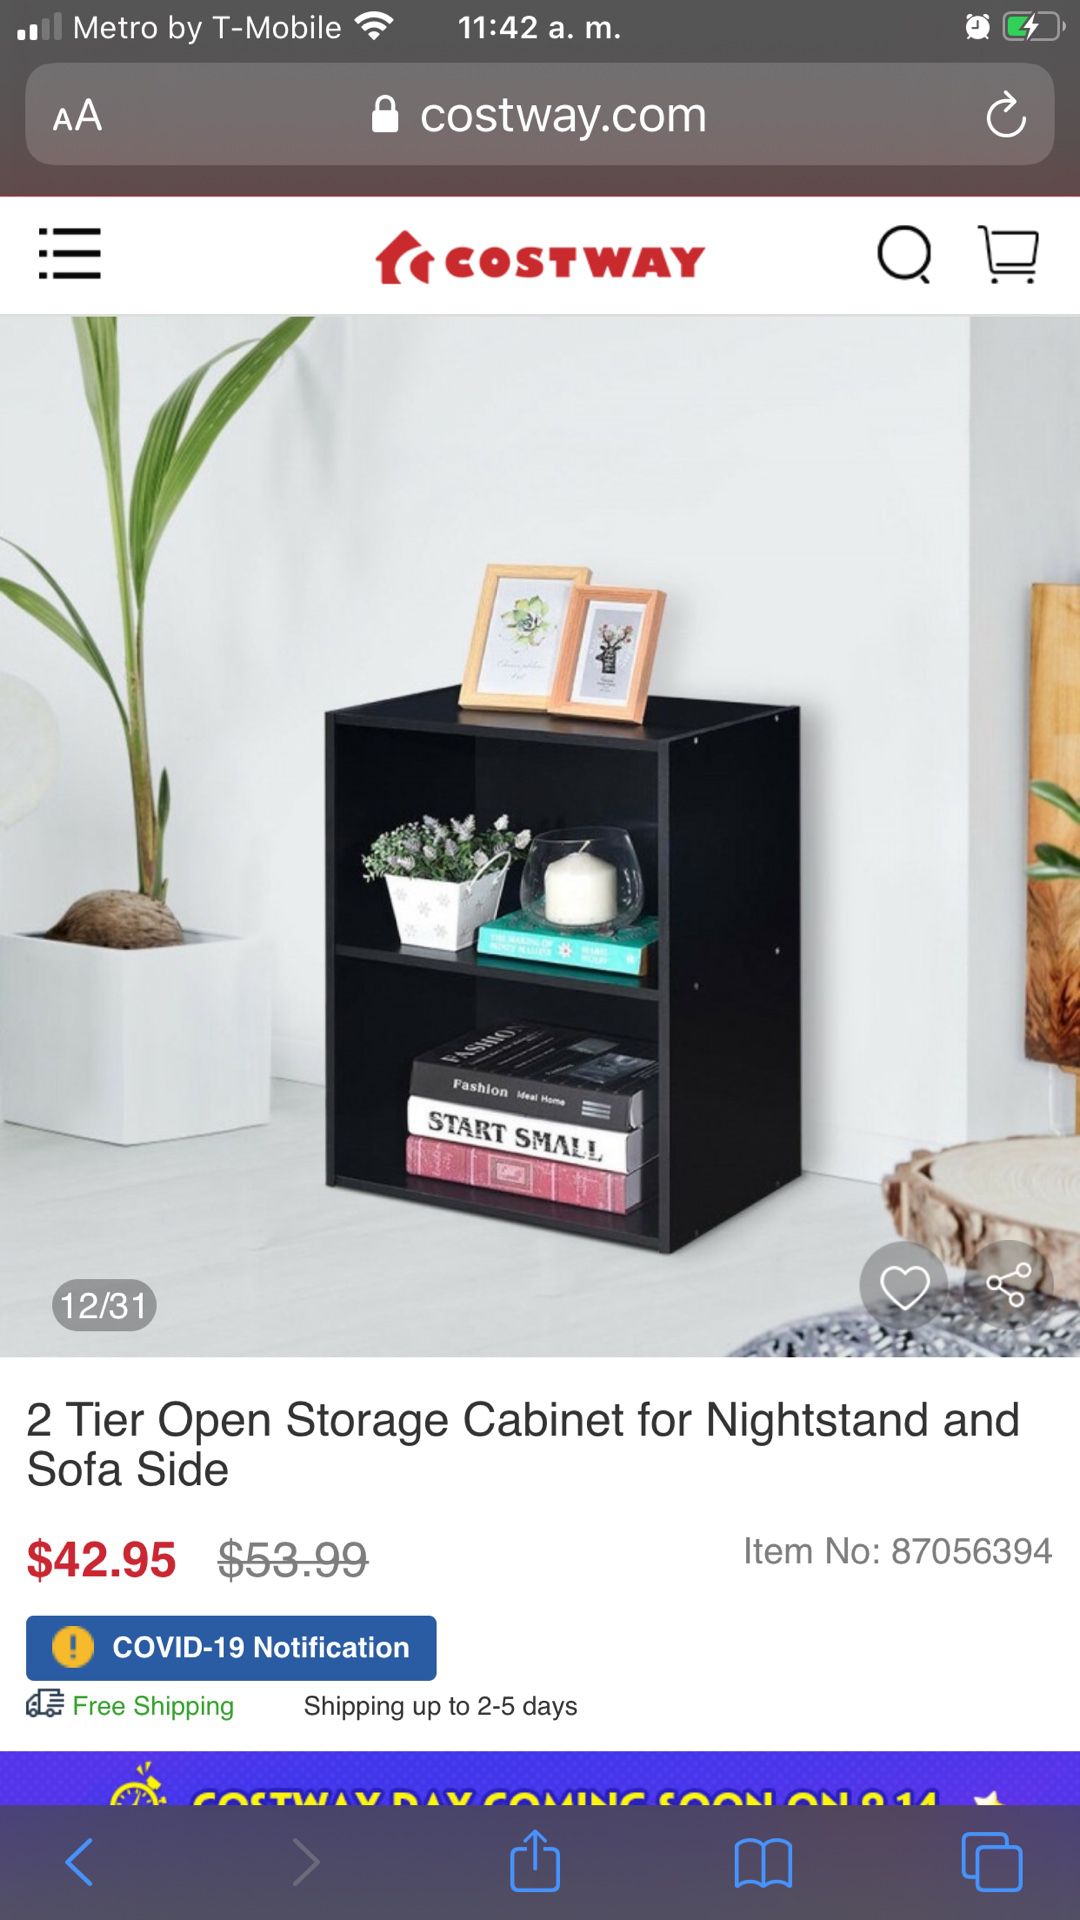 2 Tier Open Storage Cabinet for Nightstand and Sofa Side